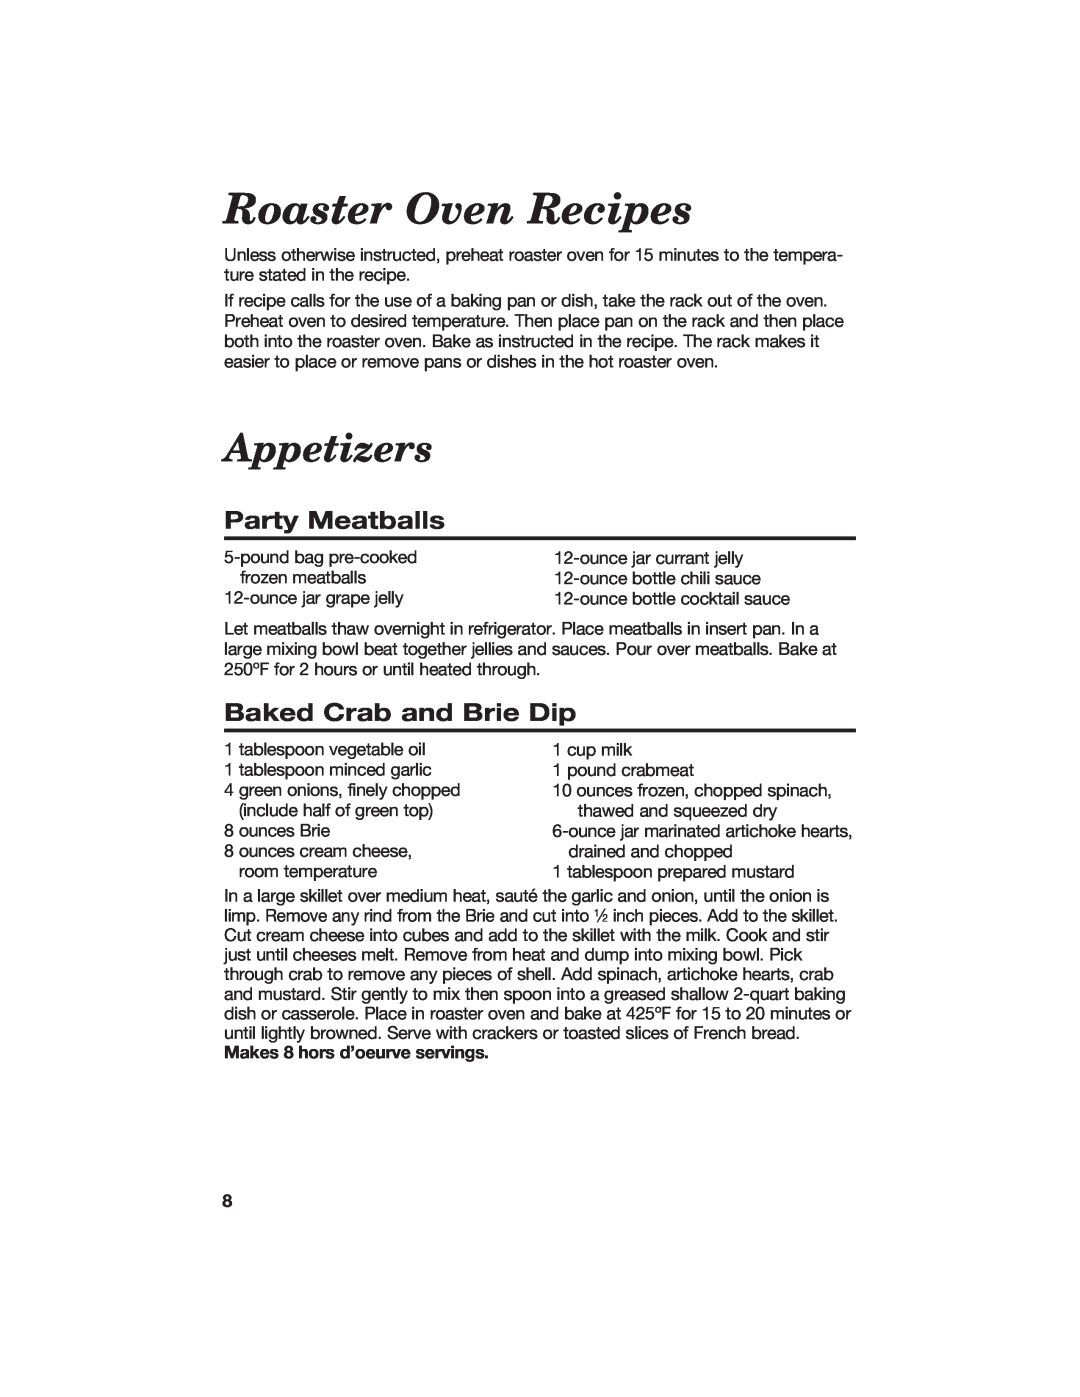 Hamilton Beach 840104300 manual Roaster Oven Recipes, Appetizers, Party Meatballs, Baked Crab and Brie Dip 